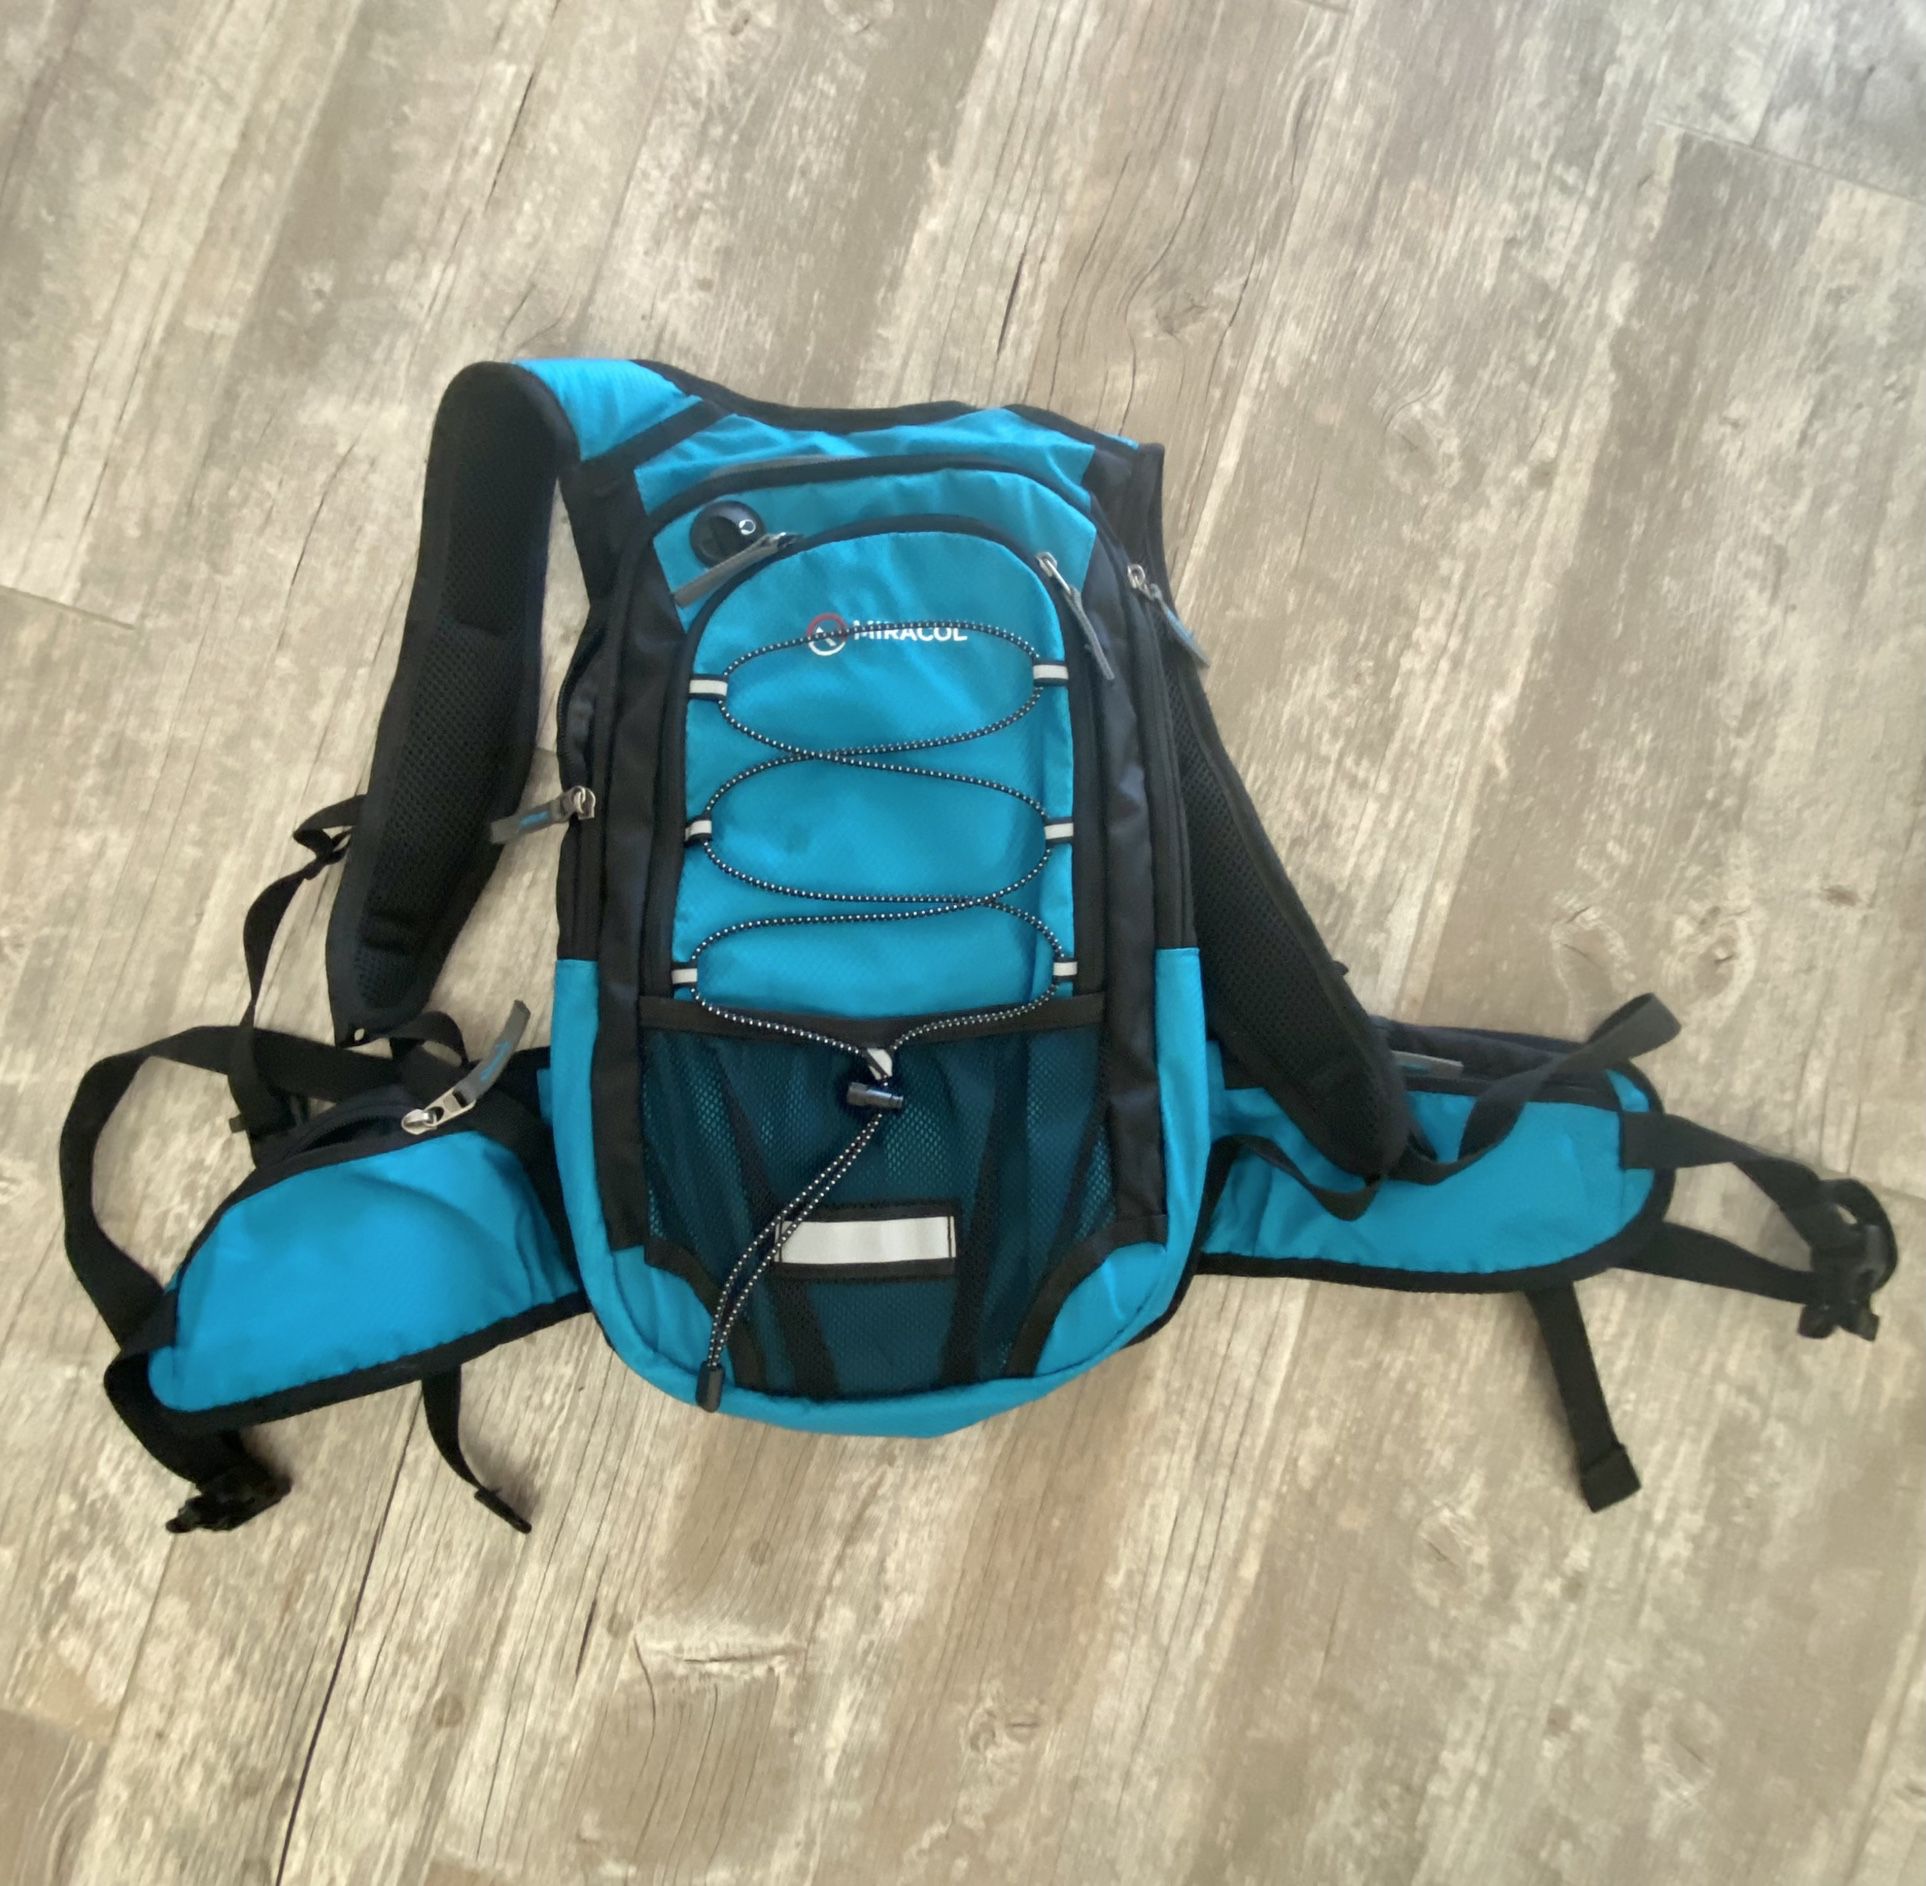 MIRACOL Hydration Backpack w/ 2.5L Water Pack